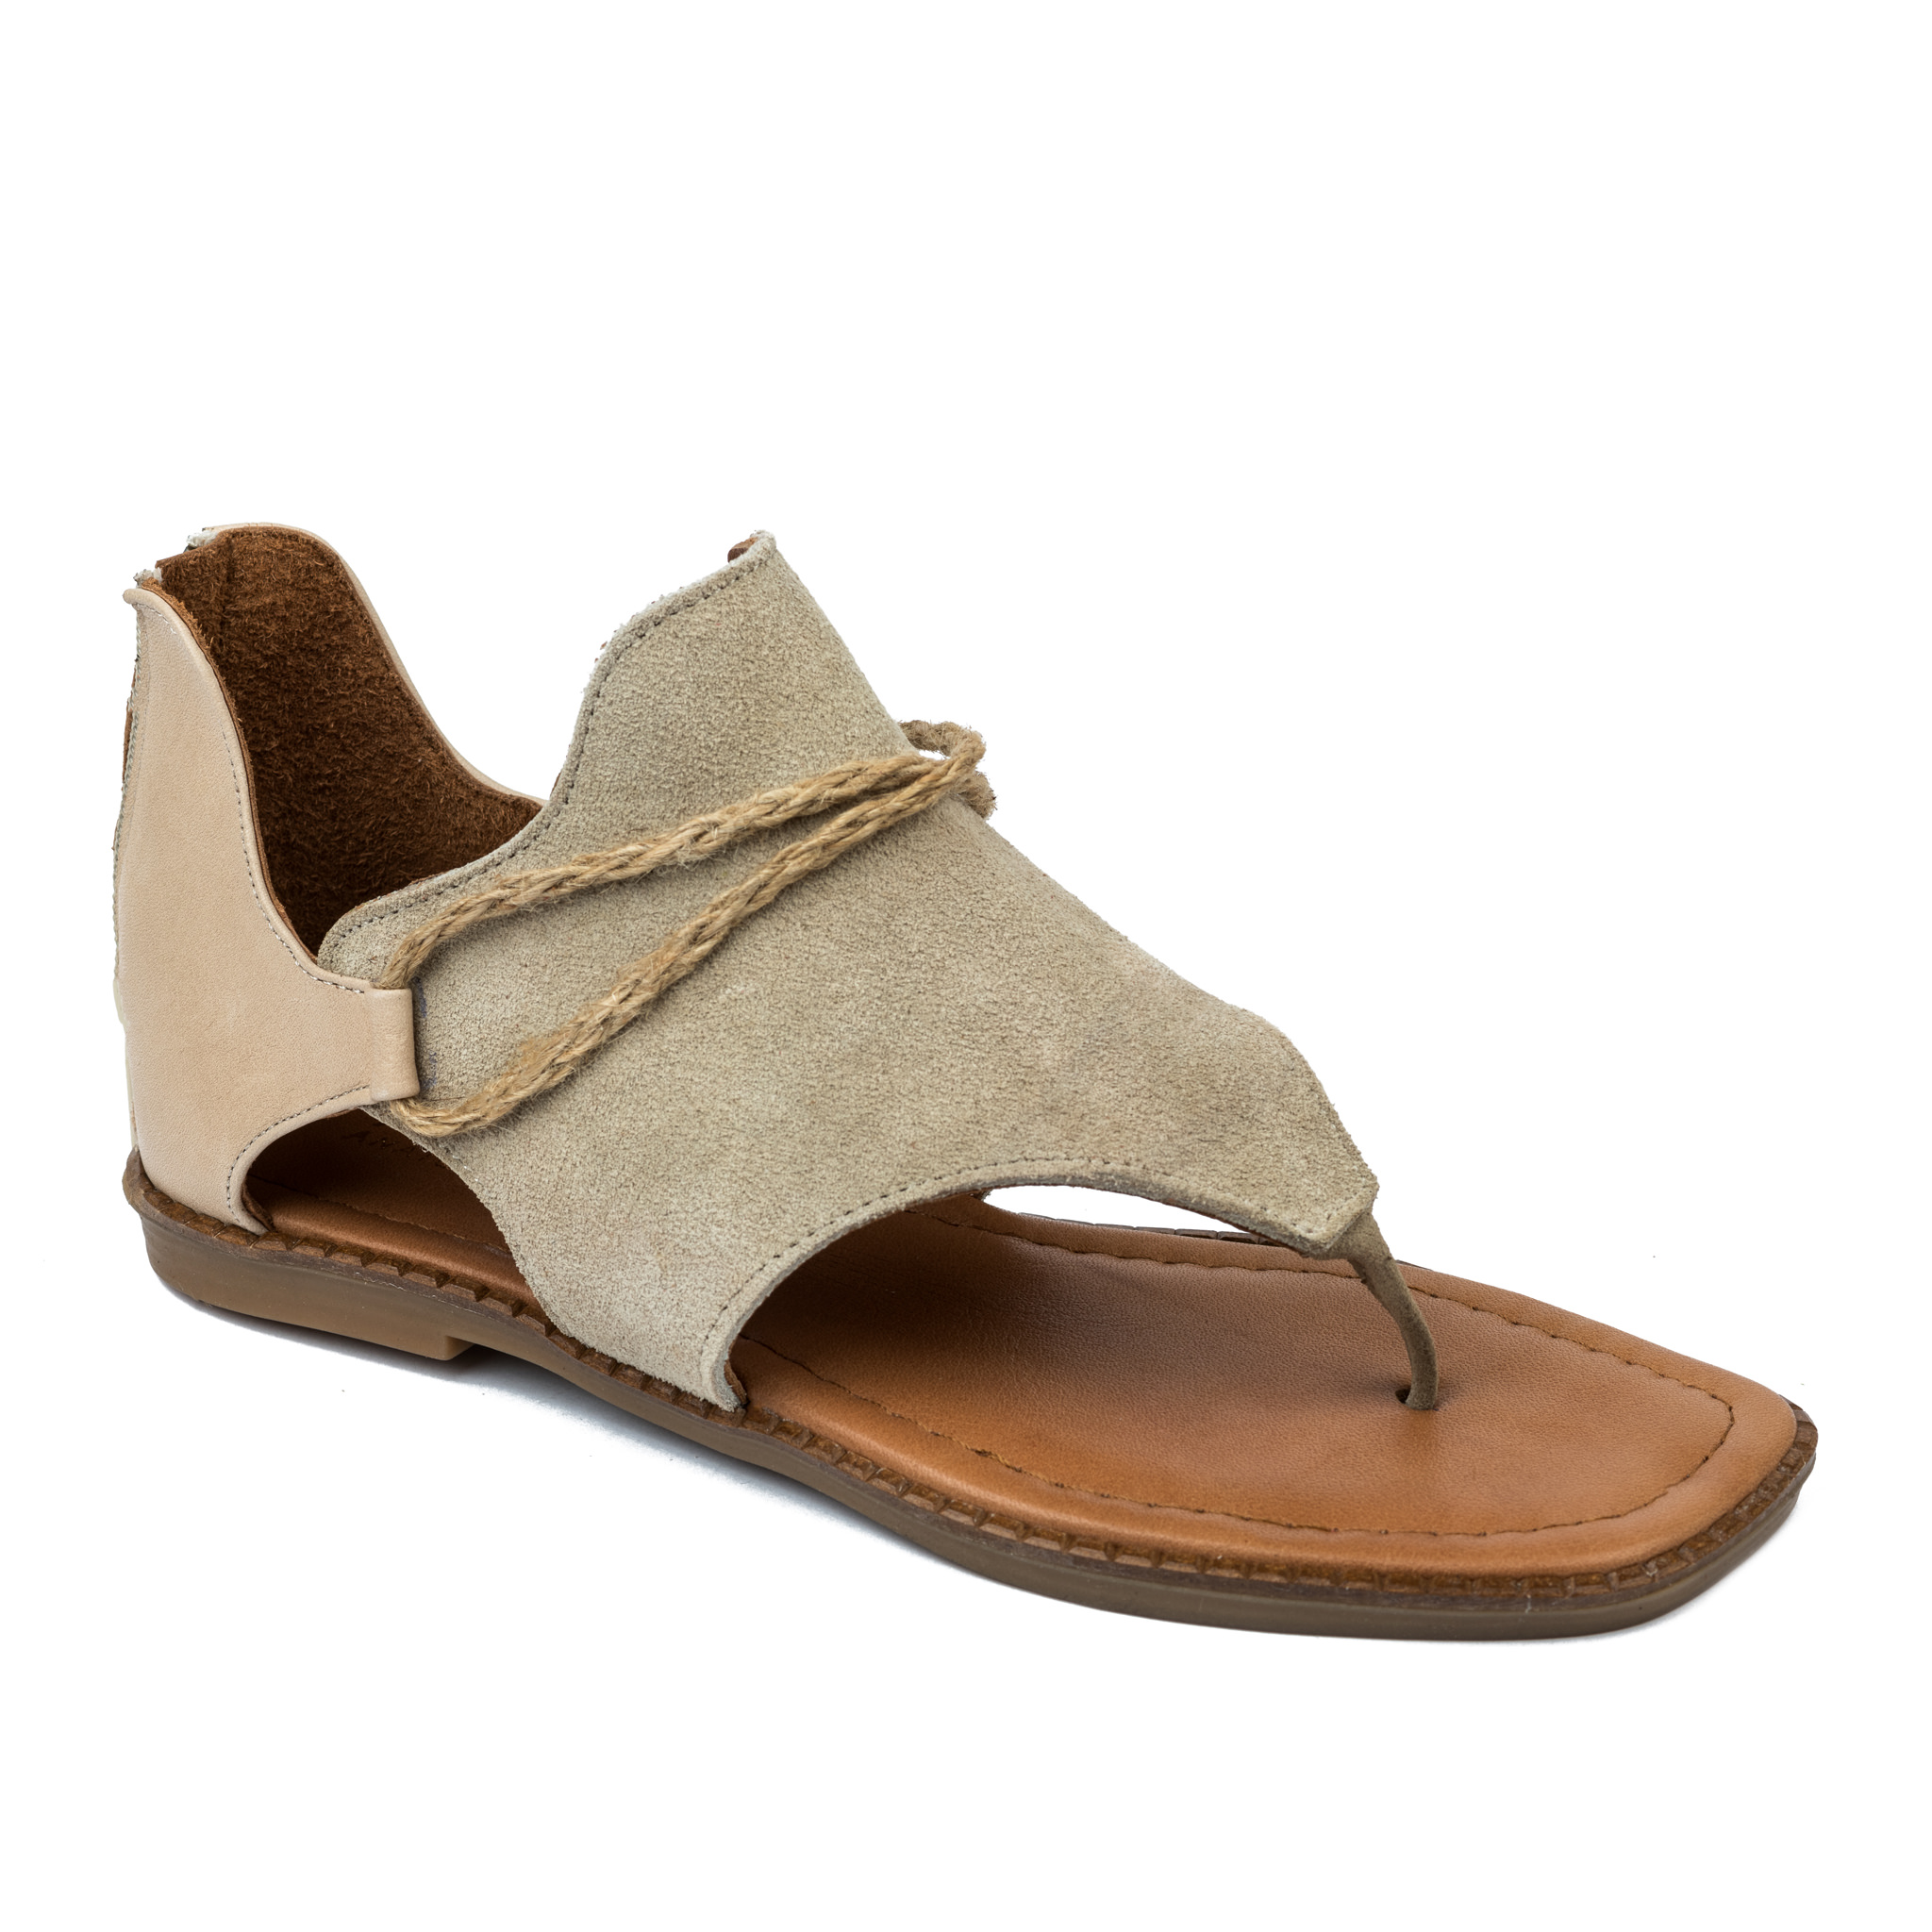 Leather sandals A643 - BEIGE